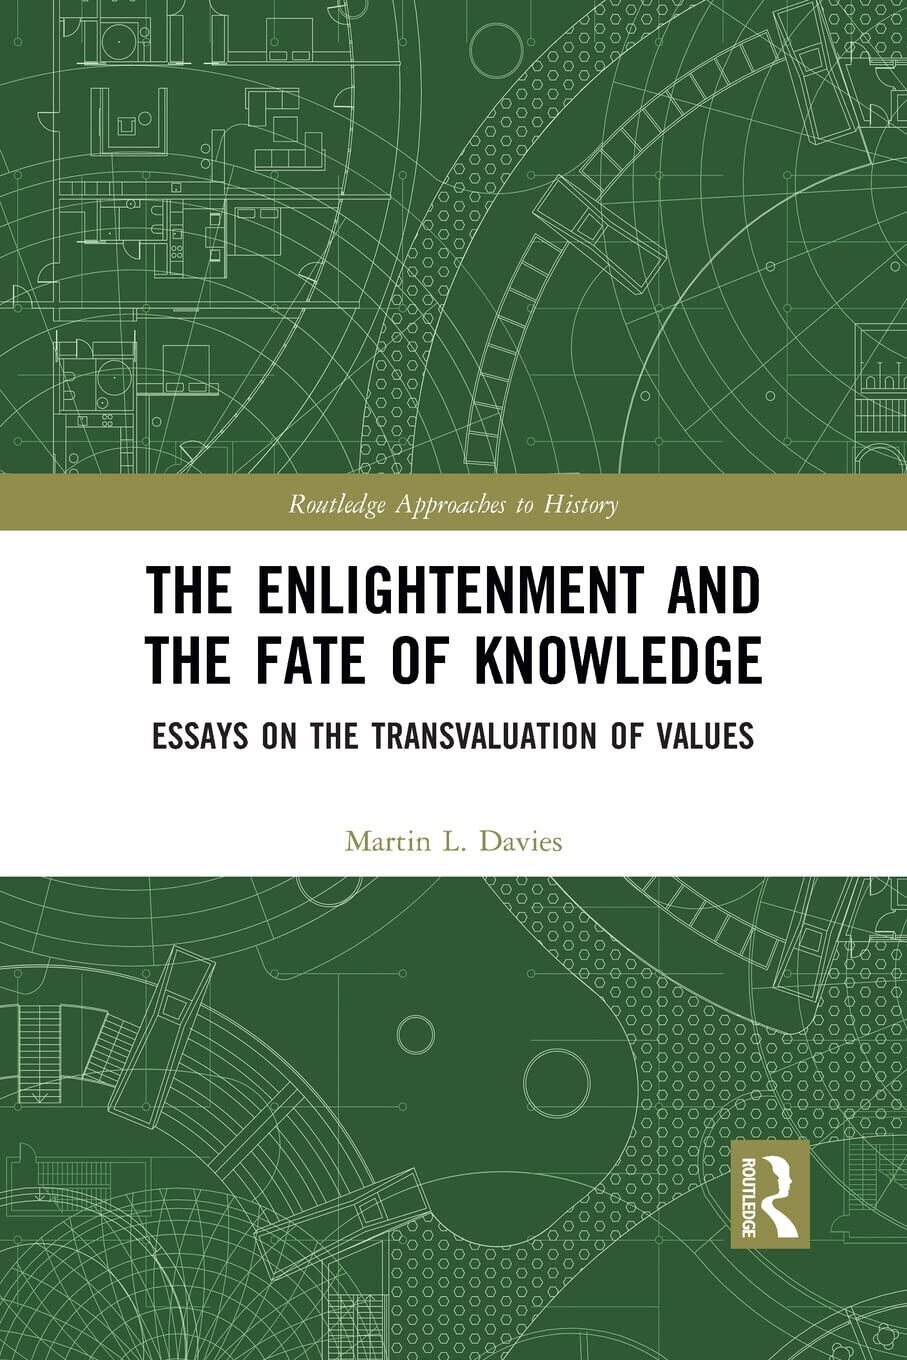 The Enlightenment And The Fate Of Knowledge - Martin Davies - 2021